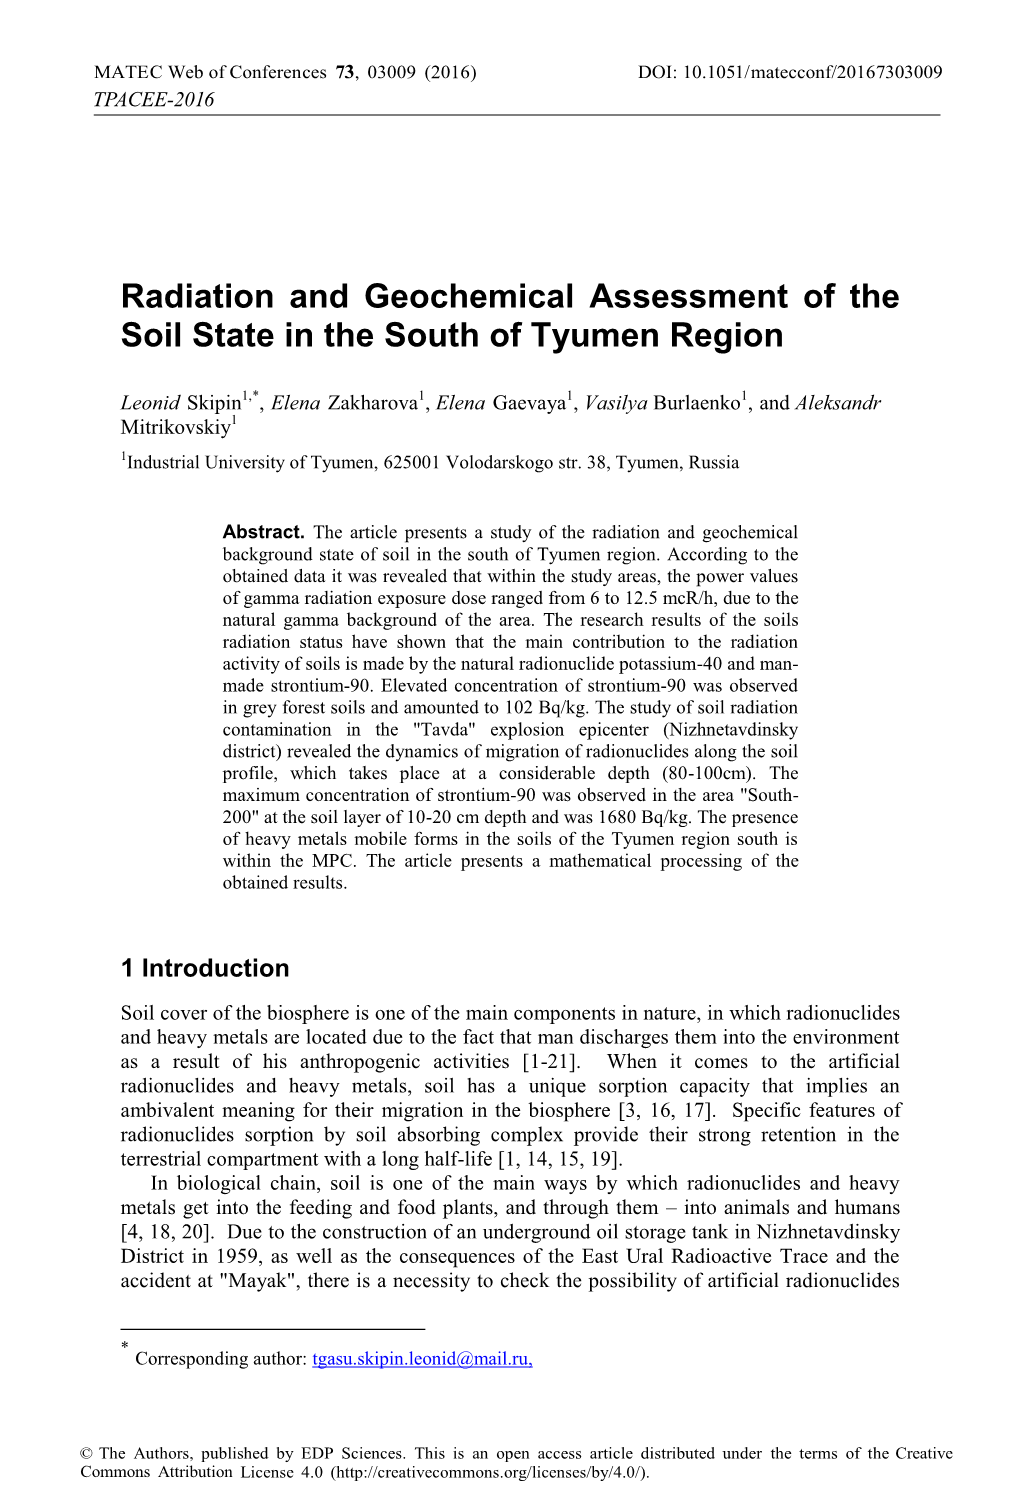 Radiation and Geochemical Assessment of the Soil State in the South of Tyumen Region